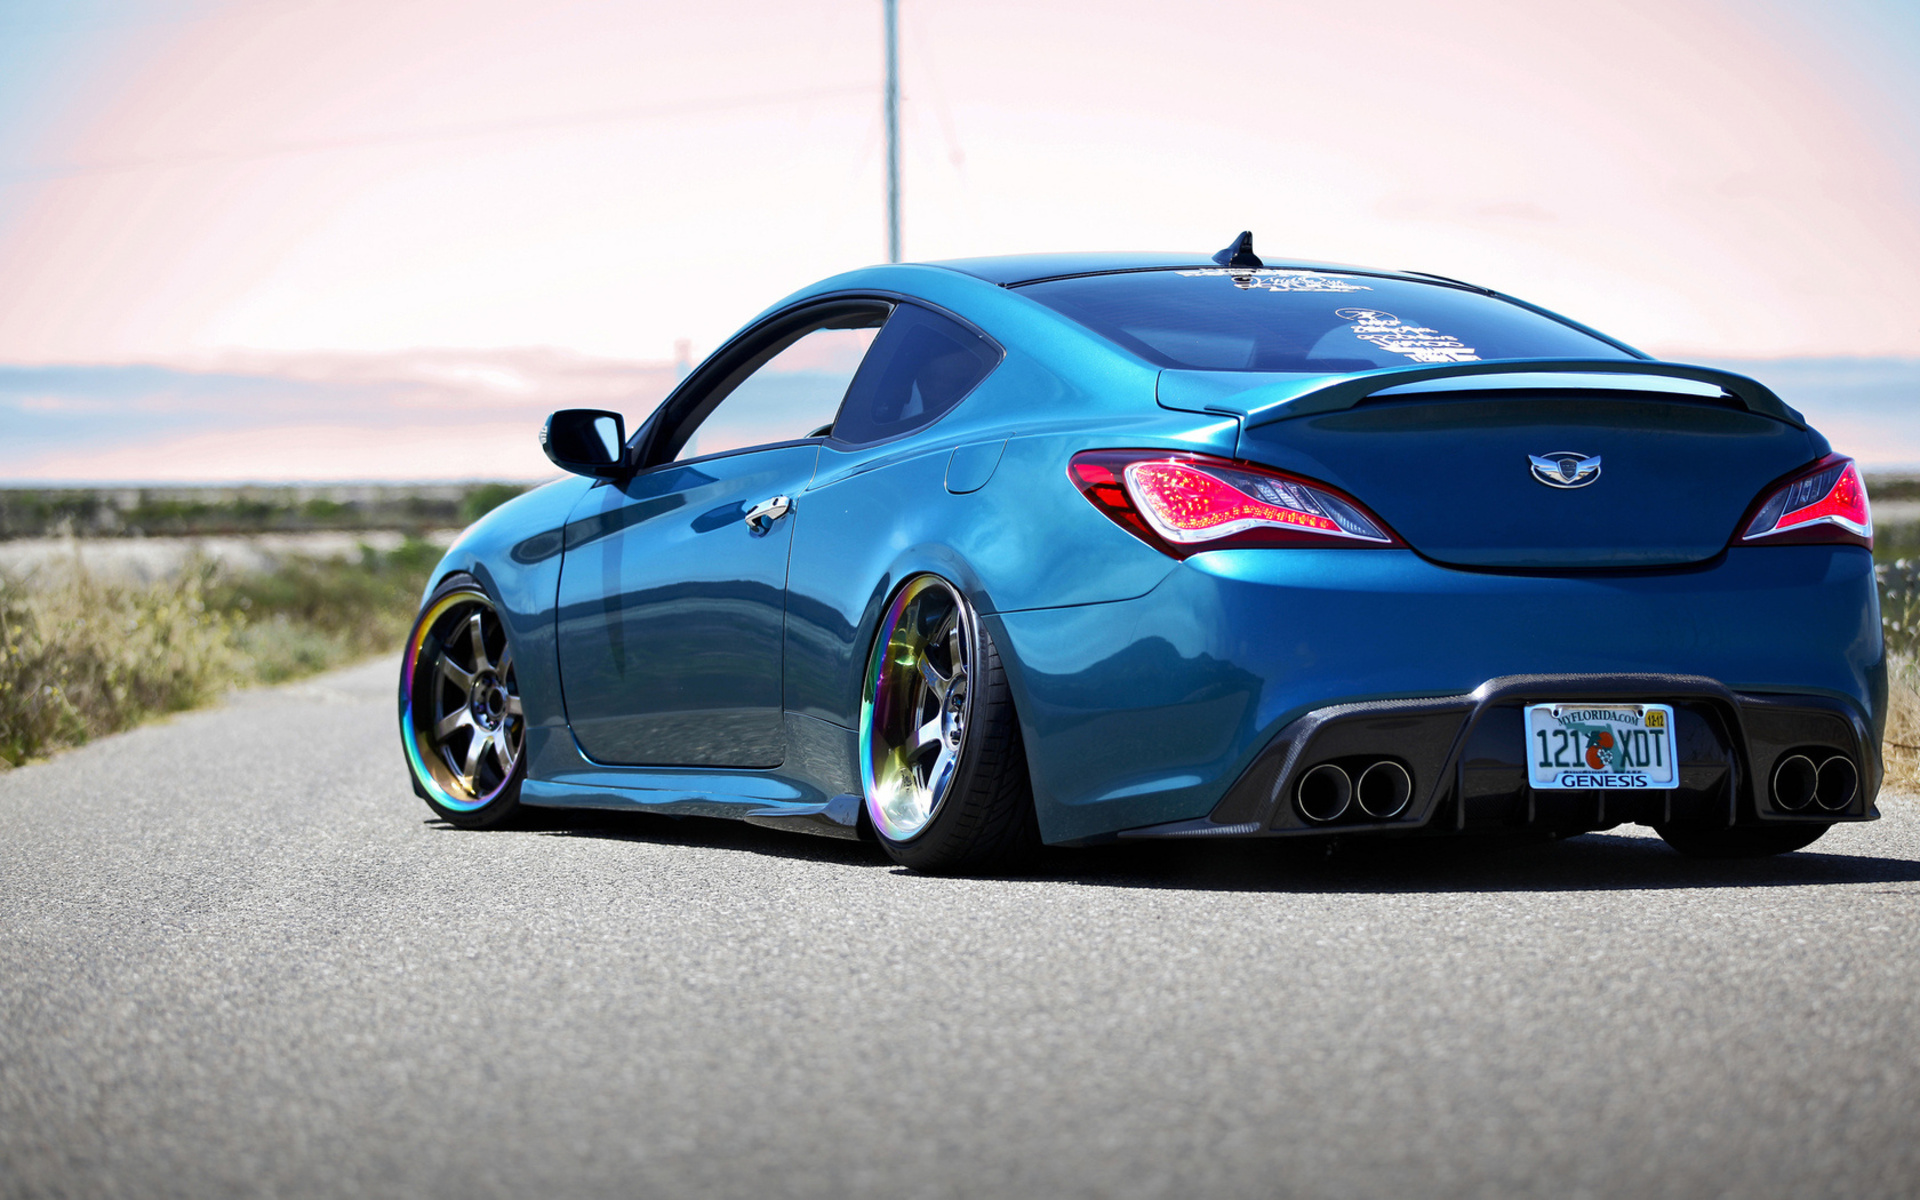 hyundai, Vehicles, Cars, Auto, Tuning, Stance, Roads, Wheels, Blue, Low Wallpaper